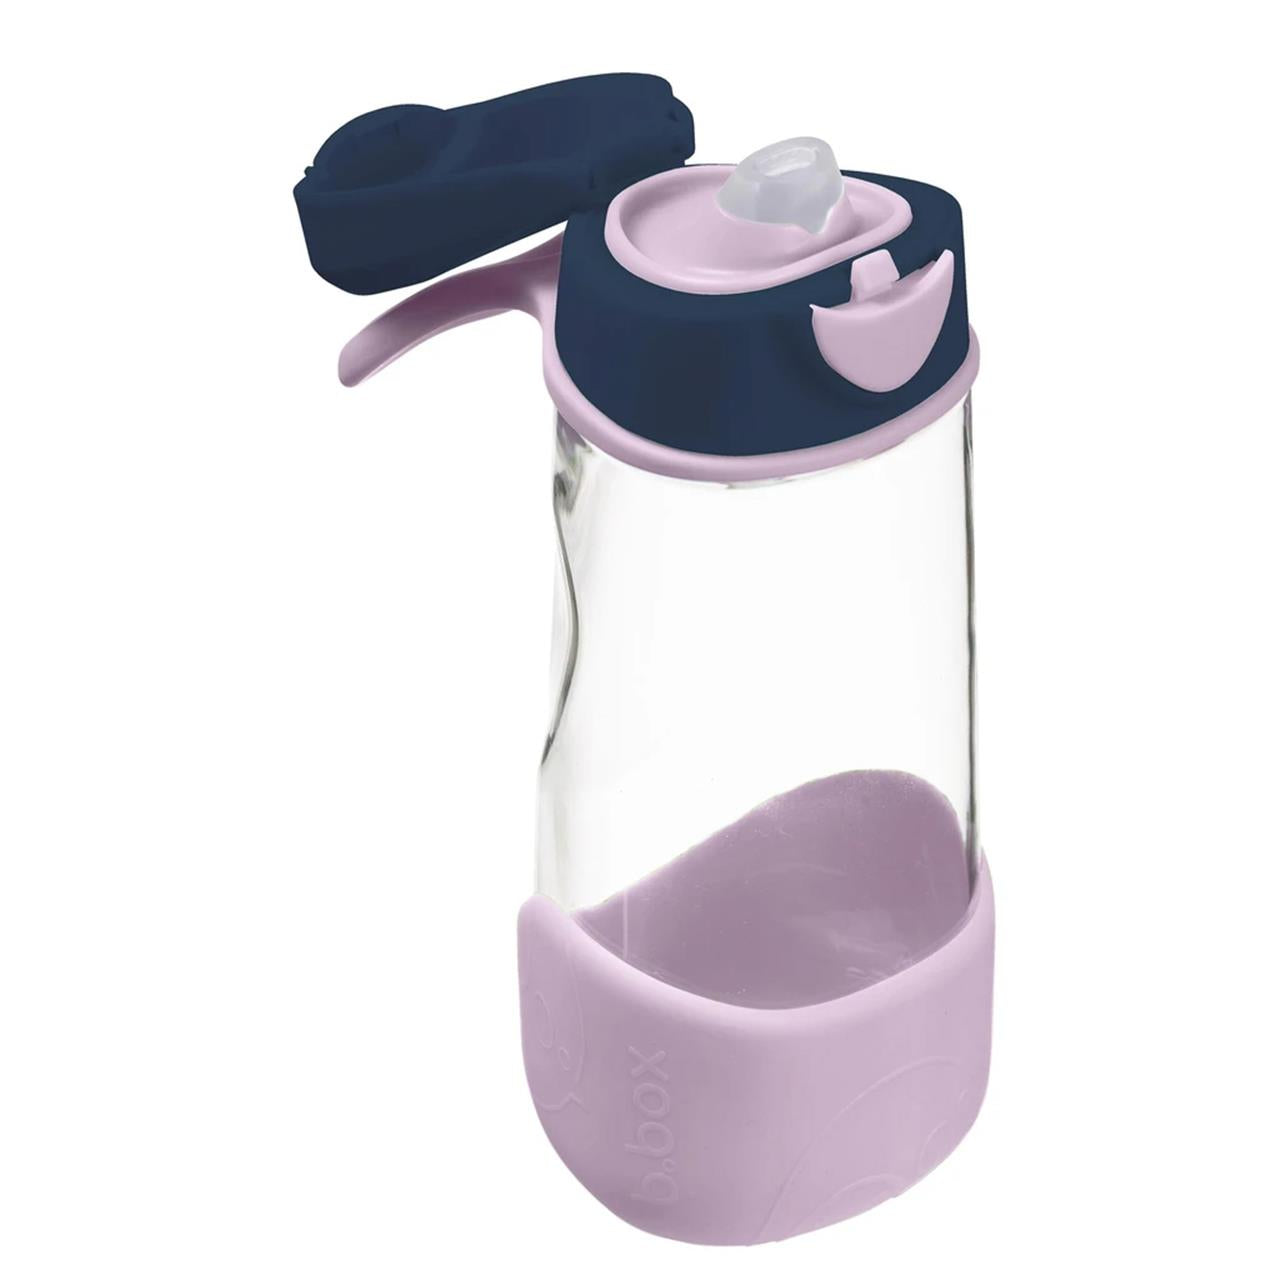 b.box Sport Spout Drink Bottle 450ml in Indigo Rose available at Bear & Moo